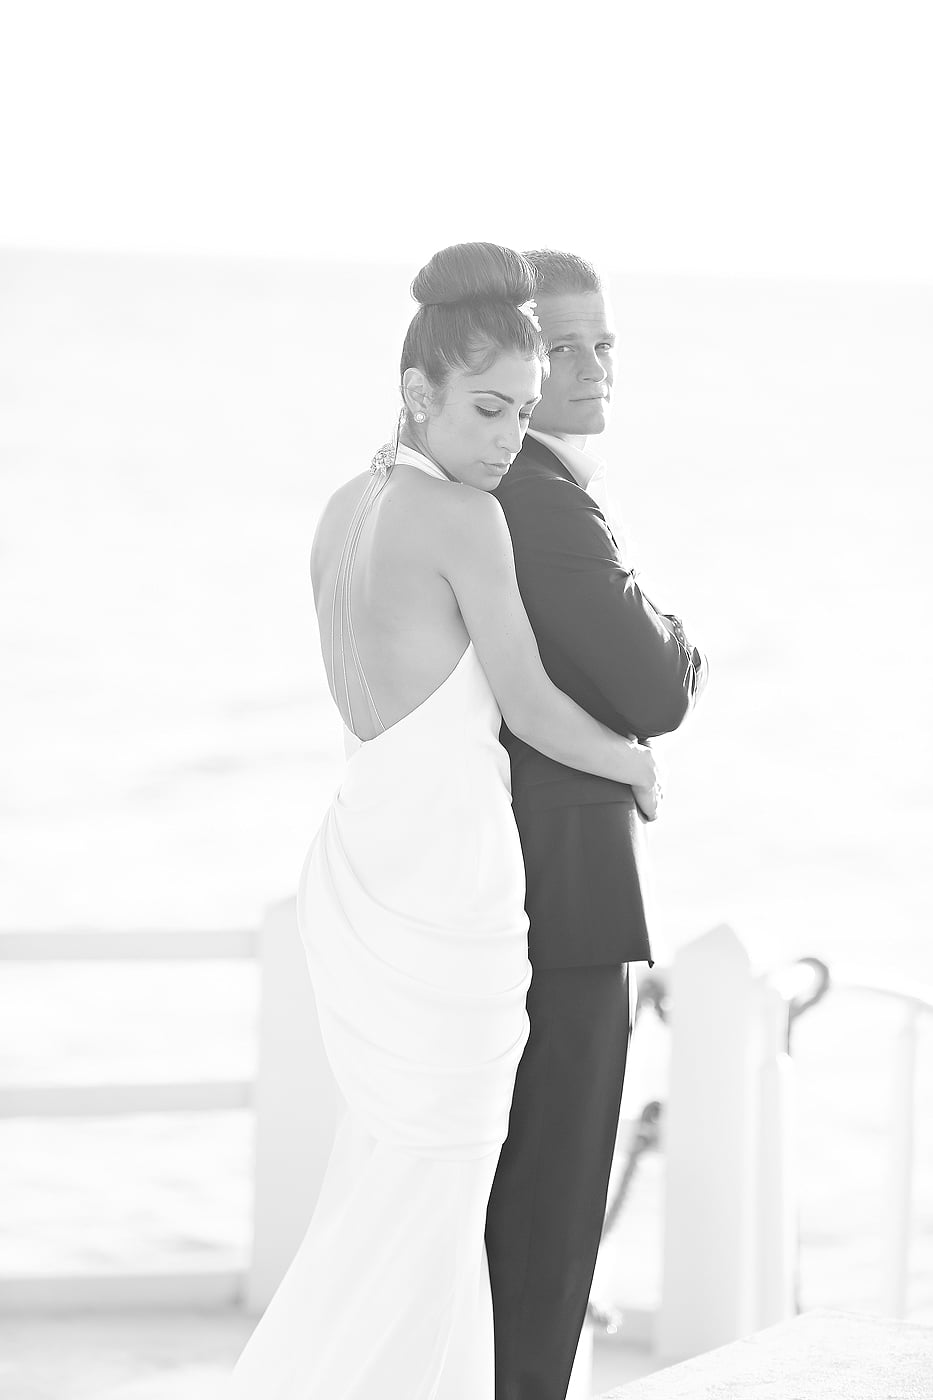 Viceroy Anguilla Wedding Photographer | Marzi and Brian’s Amazing Destination Wedding Featured!!